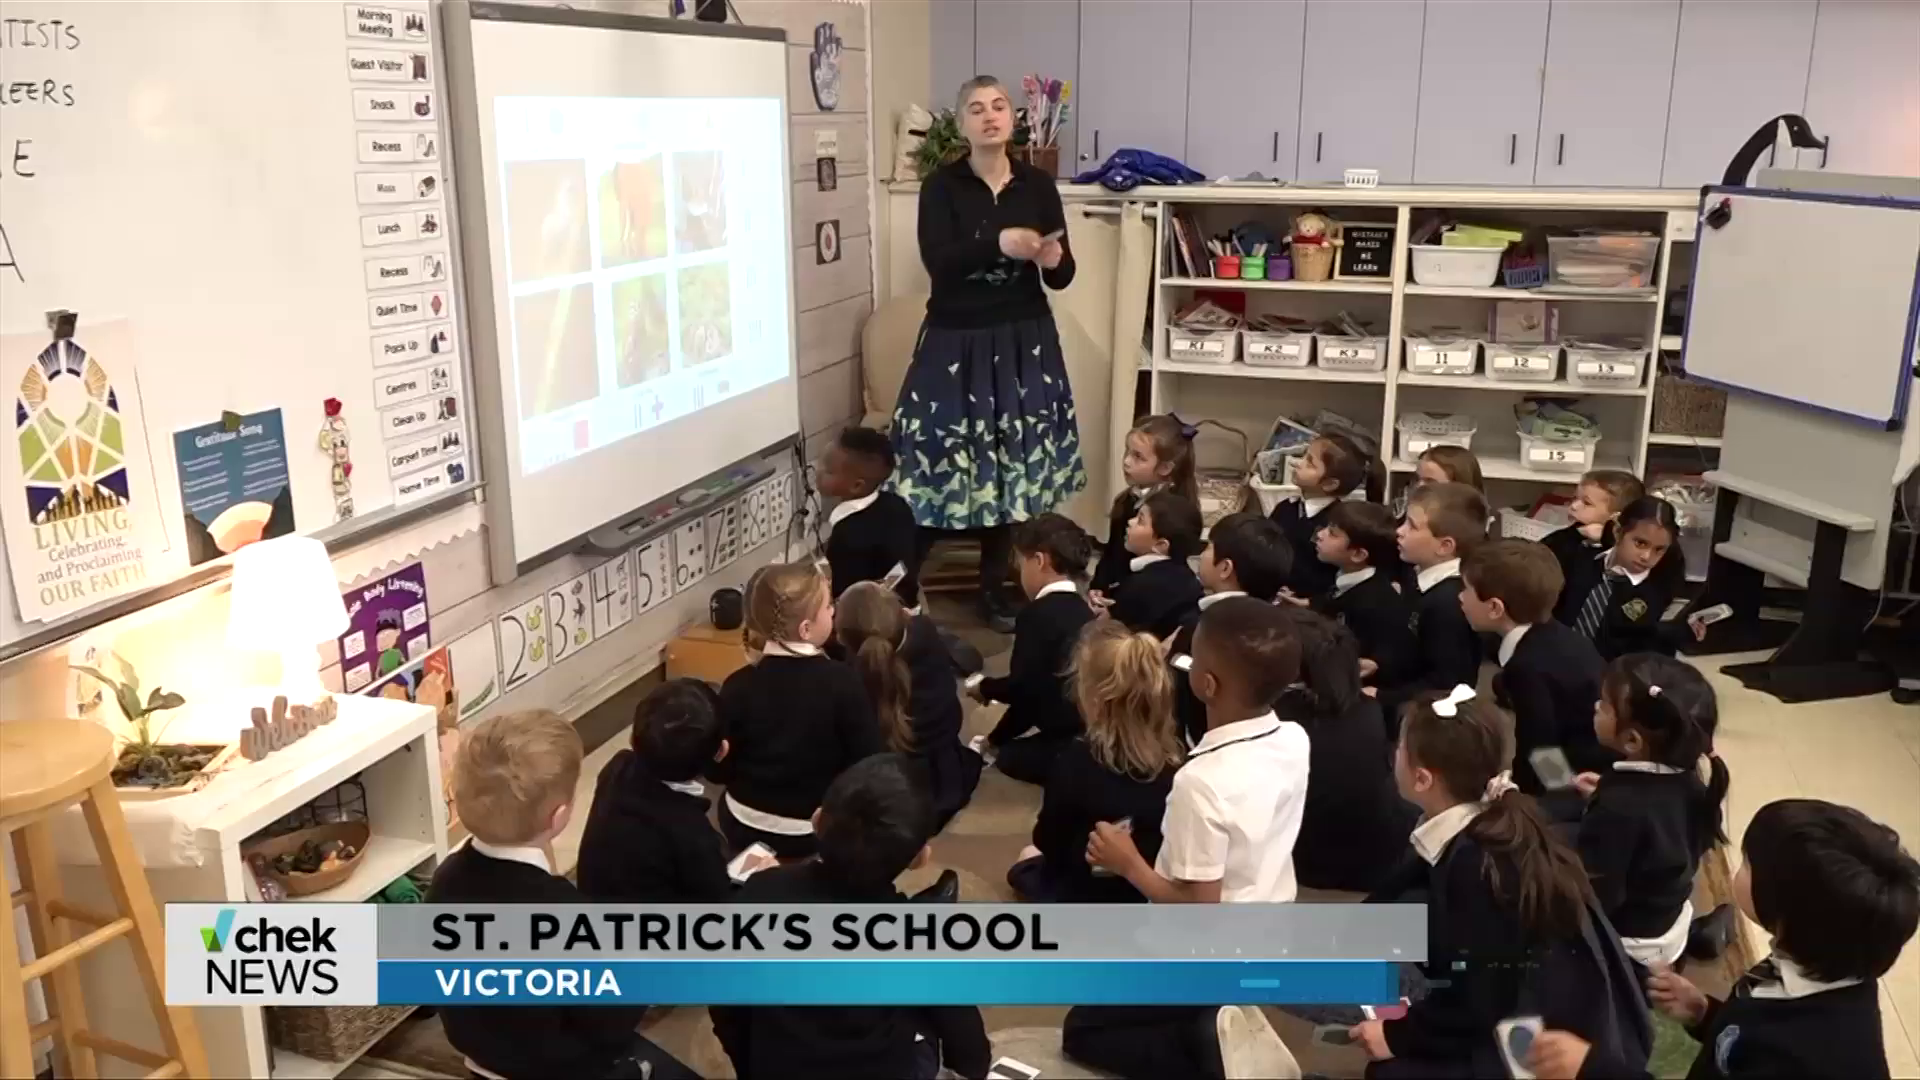 A 'giant geek' shares her love of science with kindergarten kids